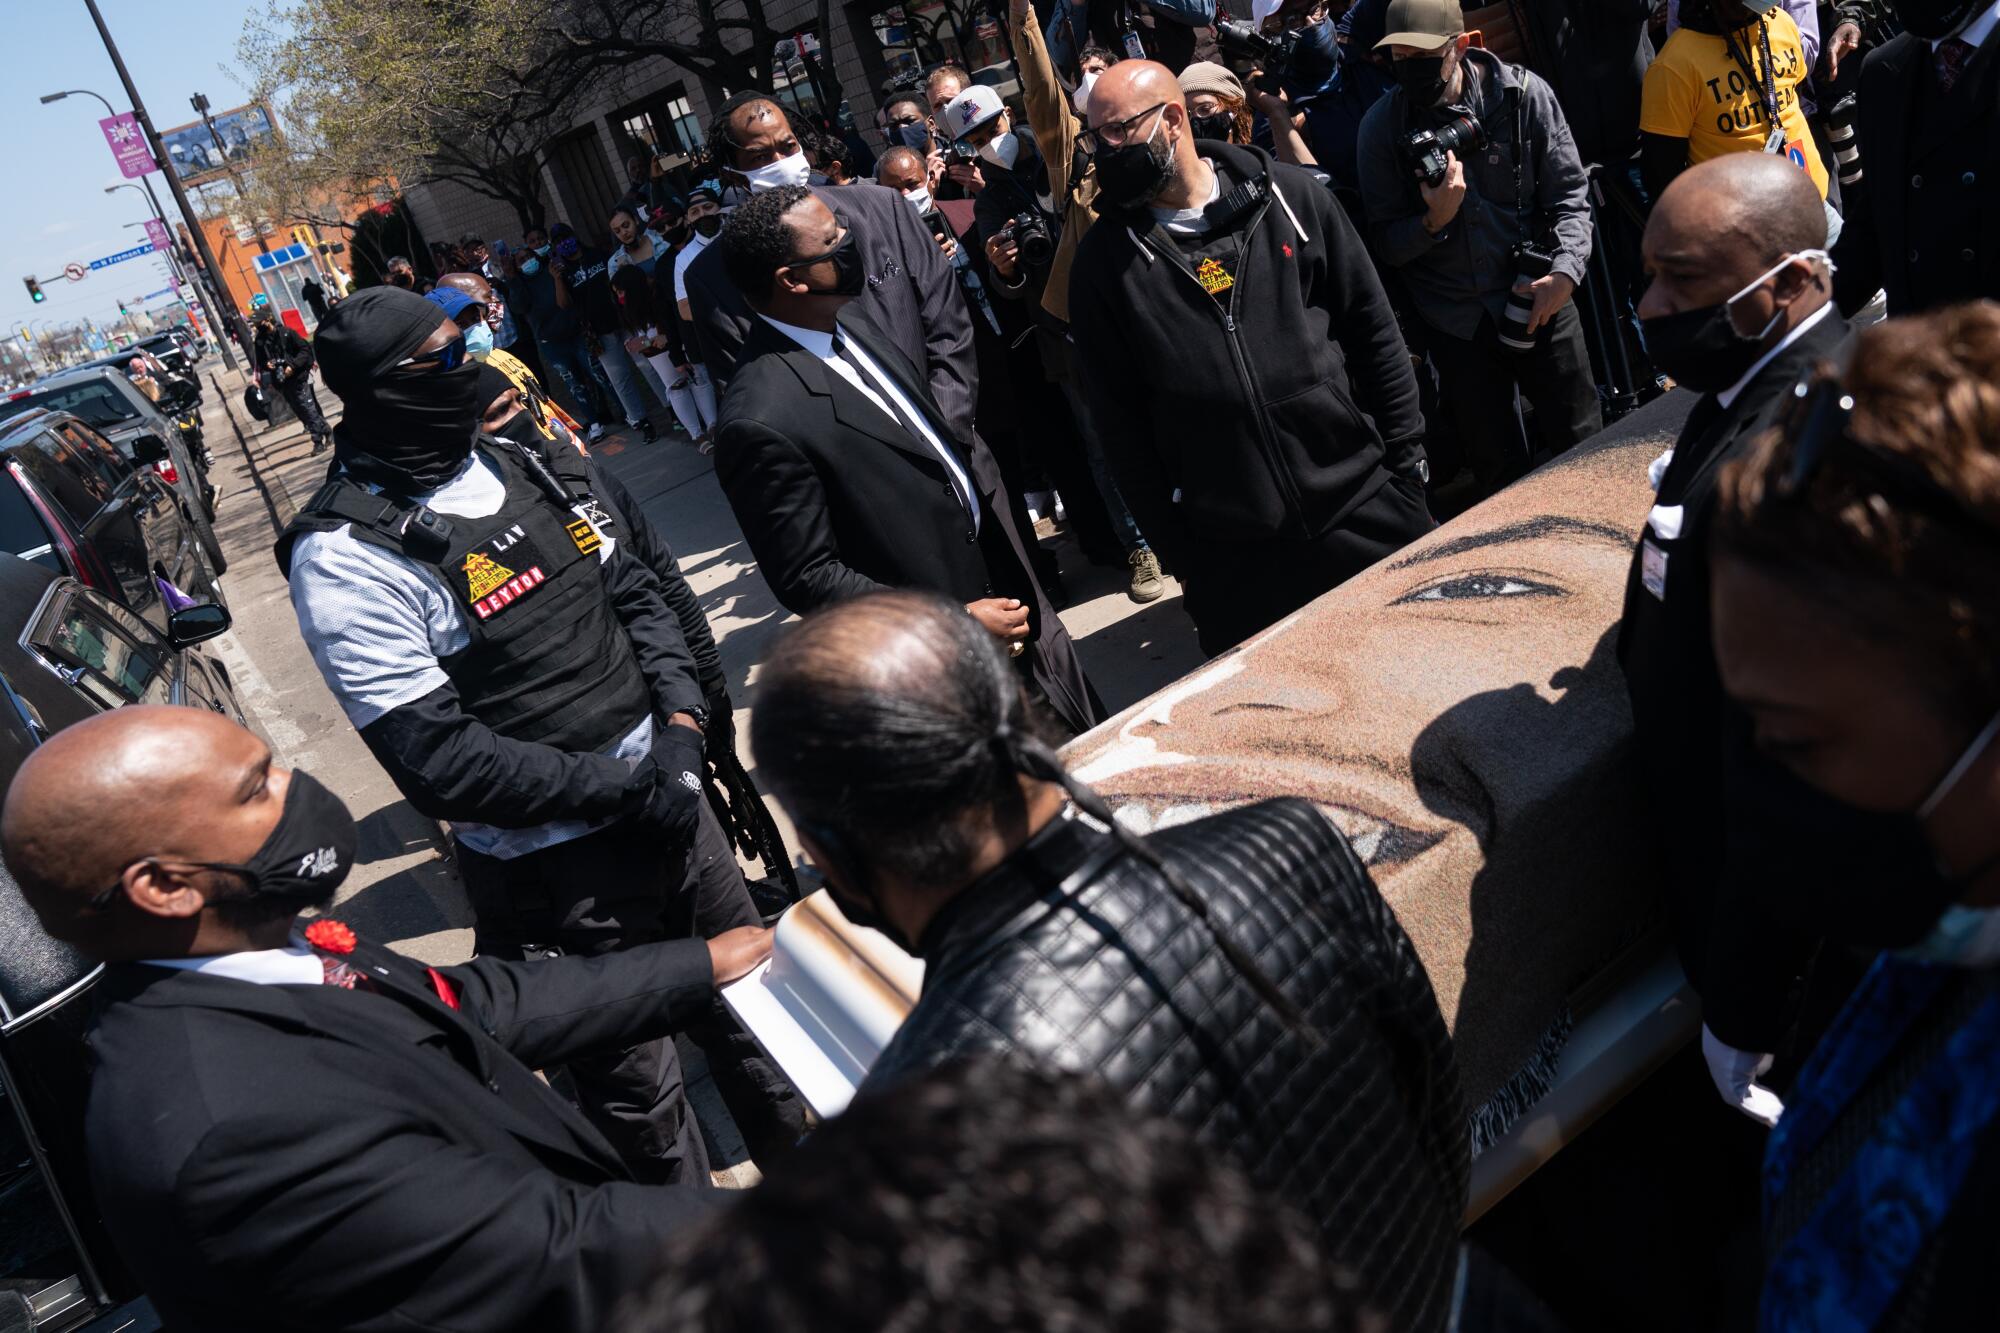 People in masks surround a casket bearing the image of a smiling young man